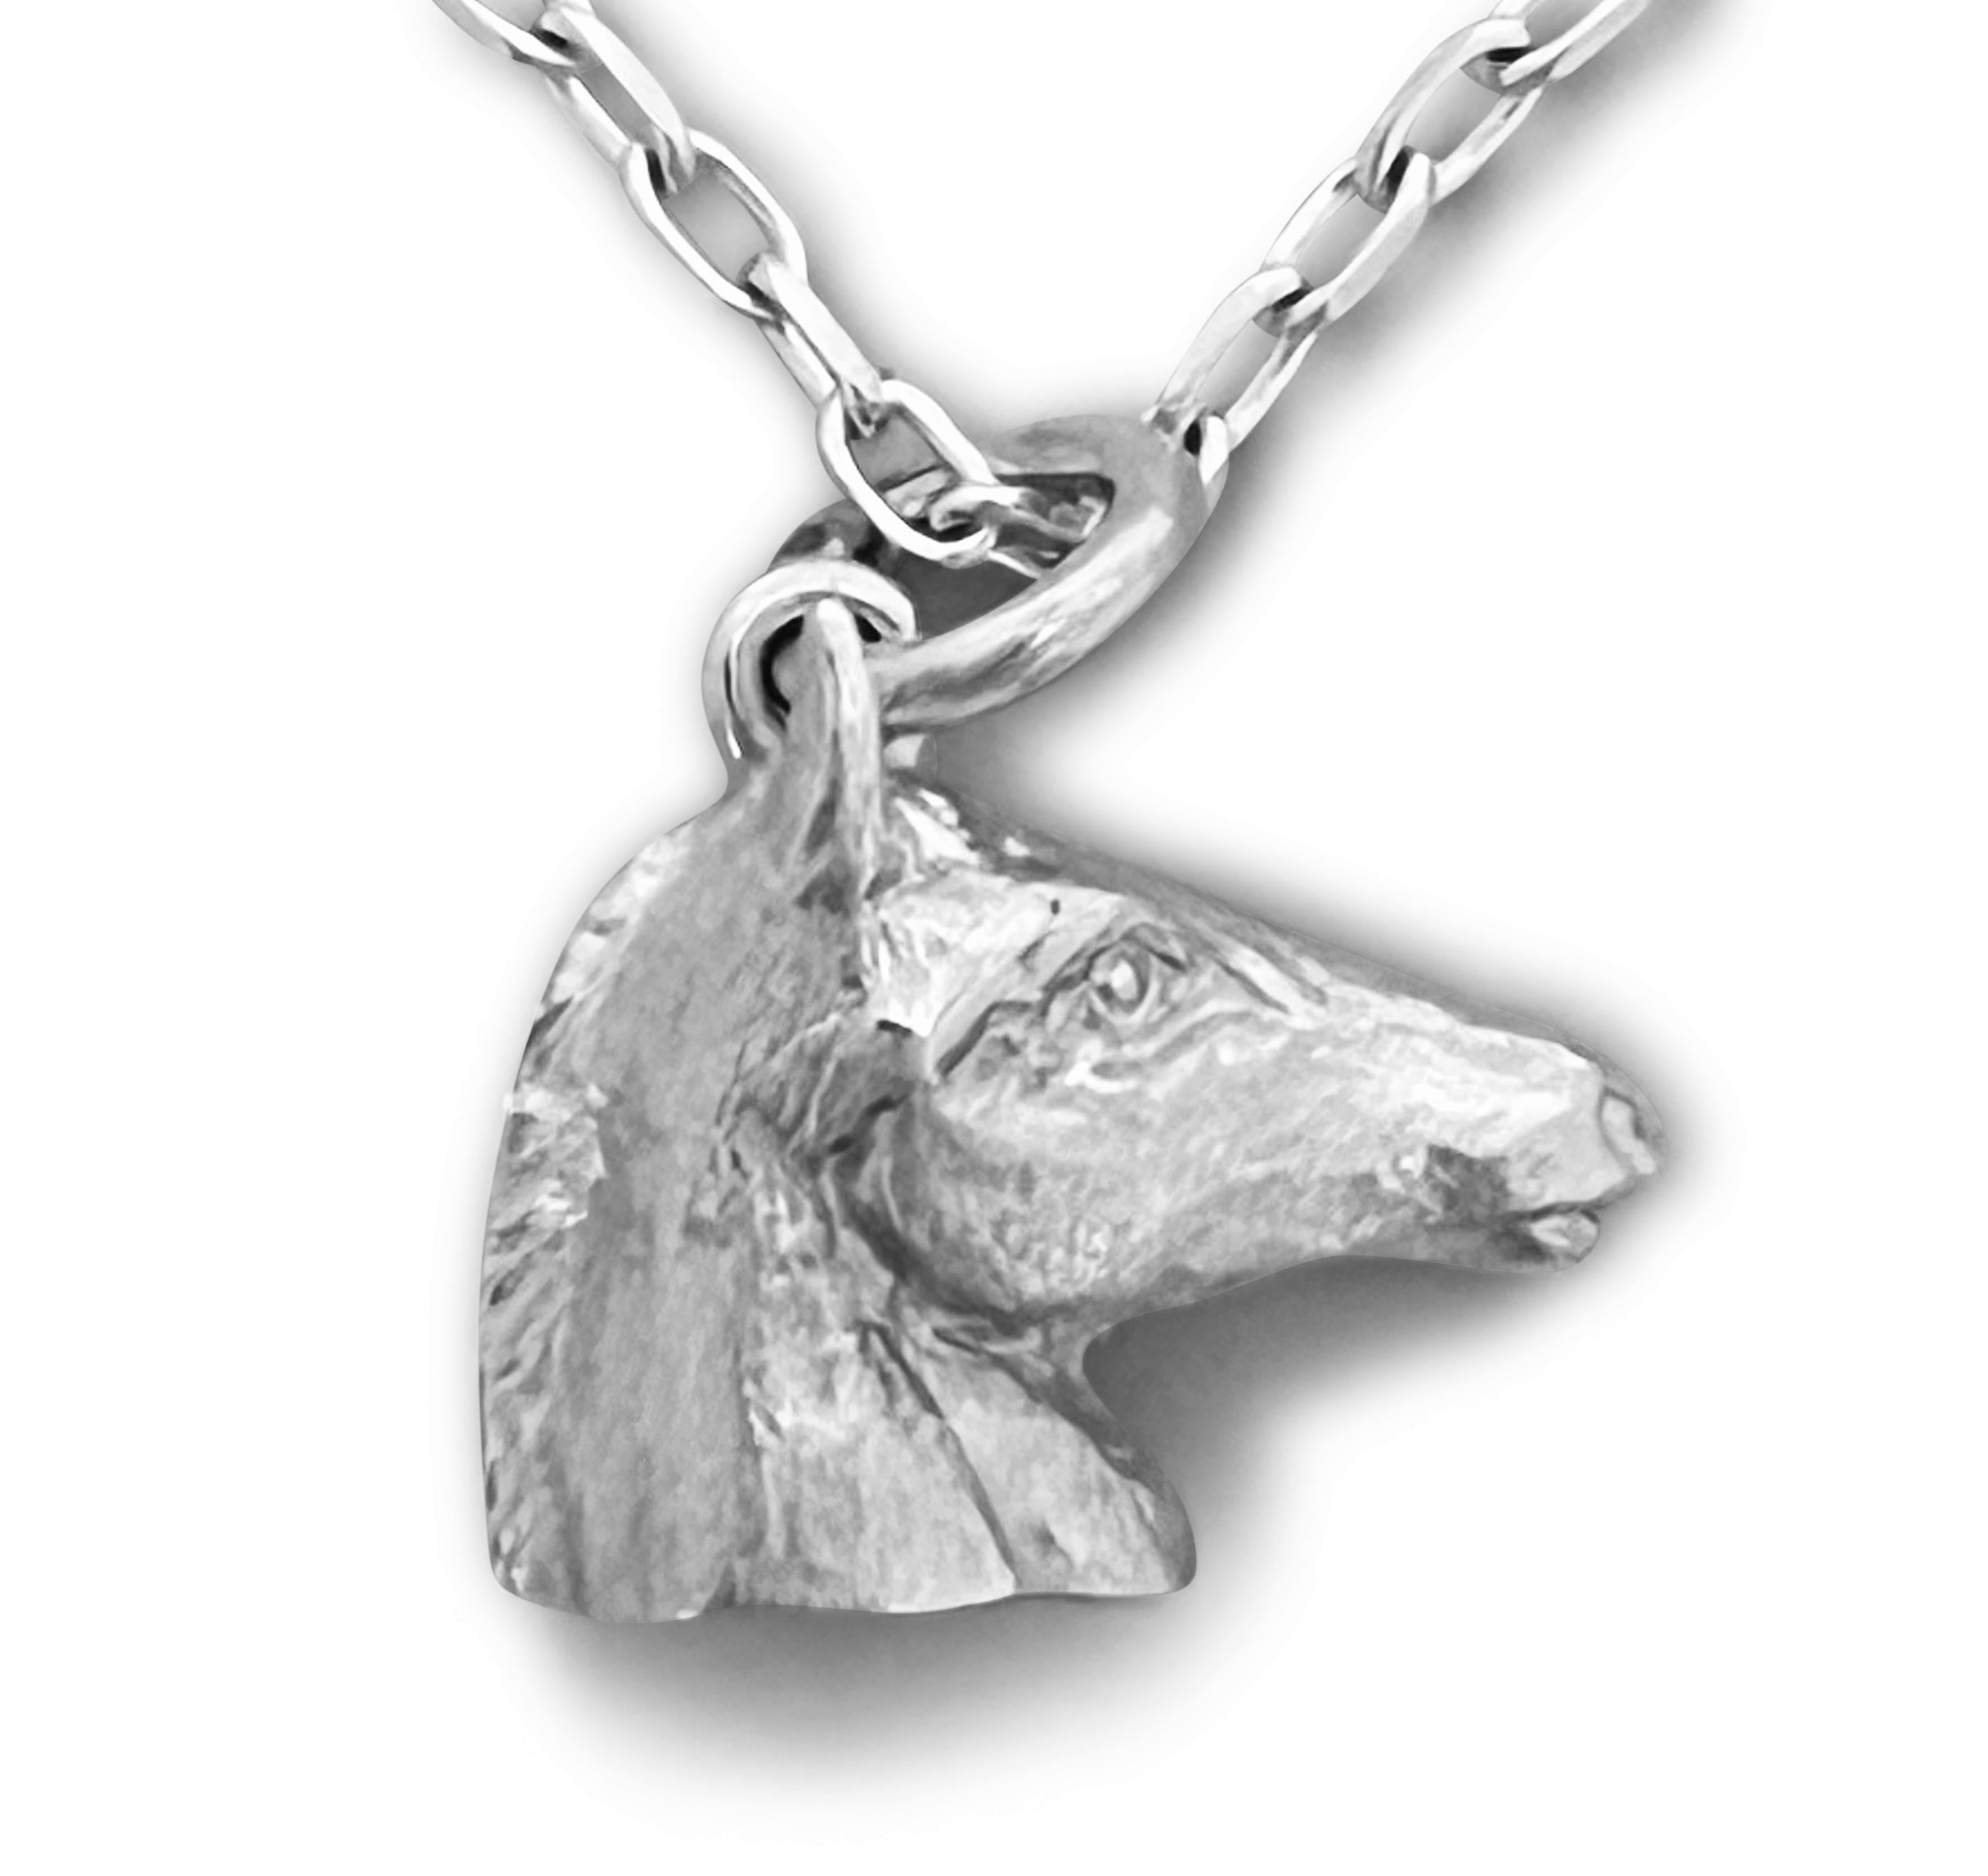 Discover the exquisite art of England’s renowned miniature wildlife sculptor, PAUL EATON, with his sculpted sterling silver horse charm or pendant.    Each bespoke animal pendant is meticulously carved, individually cast, and carefully hand-finished